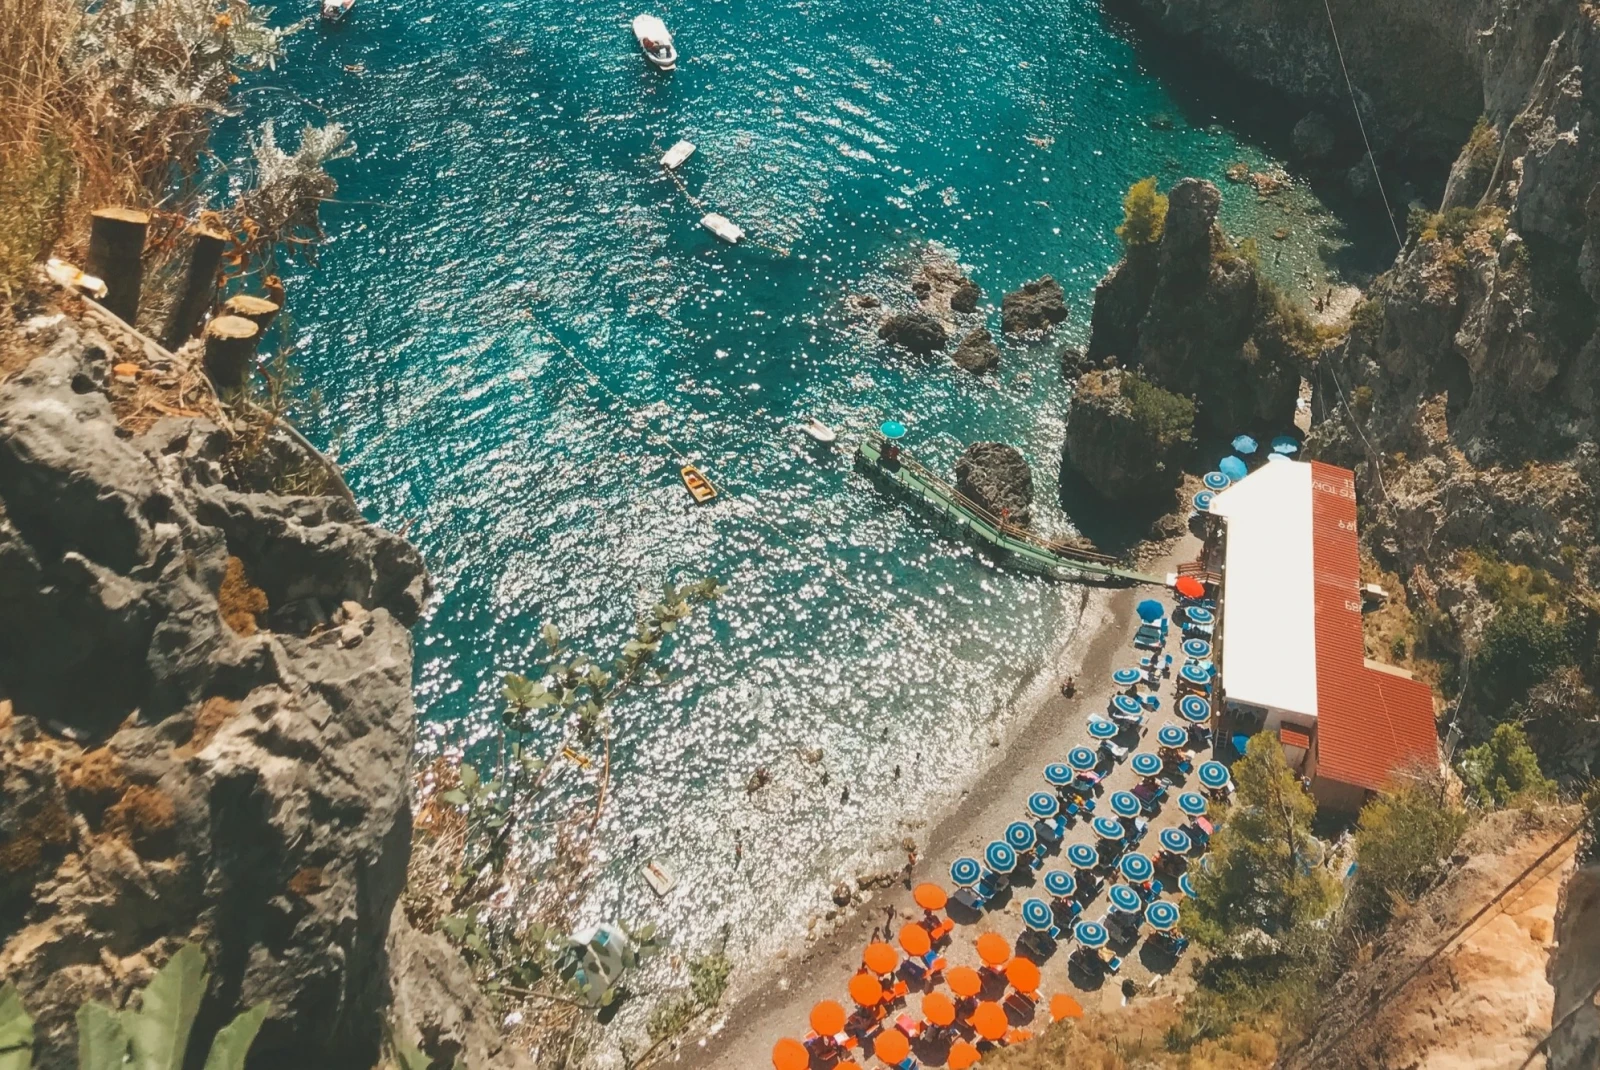 aerial view of a sunny beach with umbrellas in a secluded cove